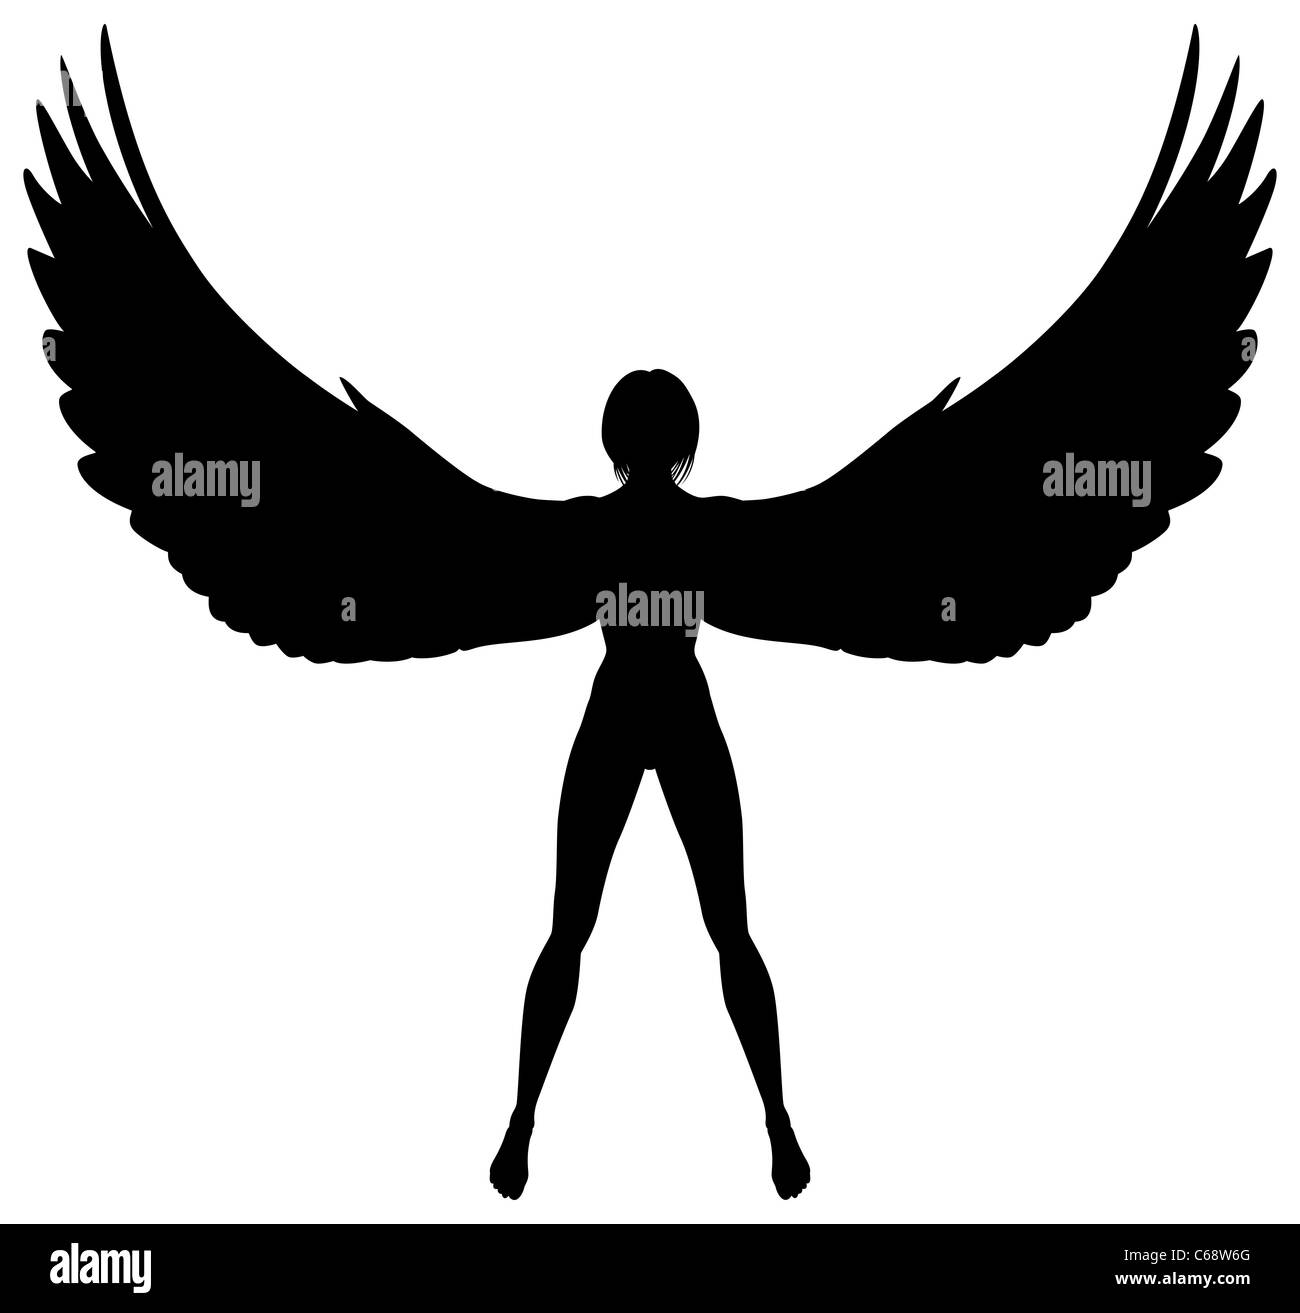 Illustrated silhouette of a woman or angel with wings Stock Photo